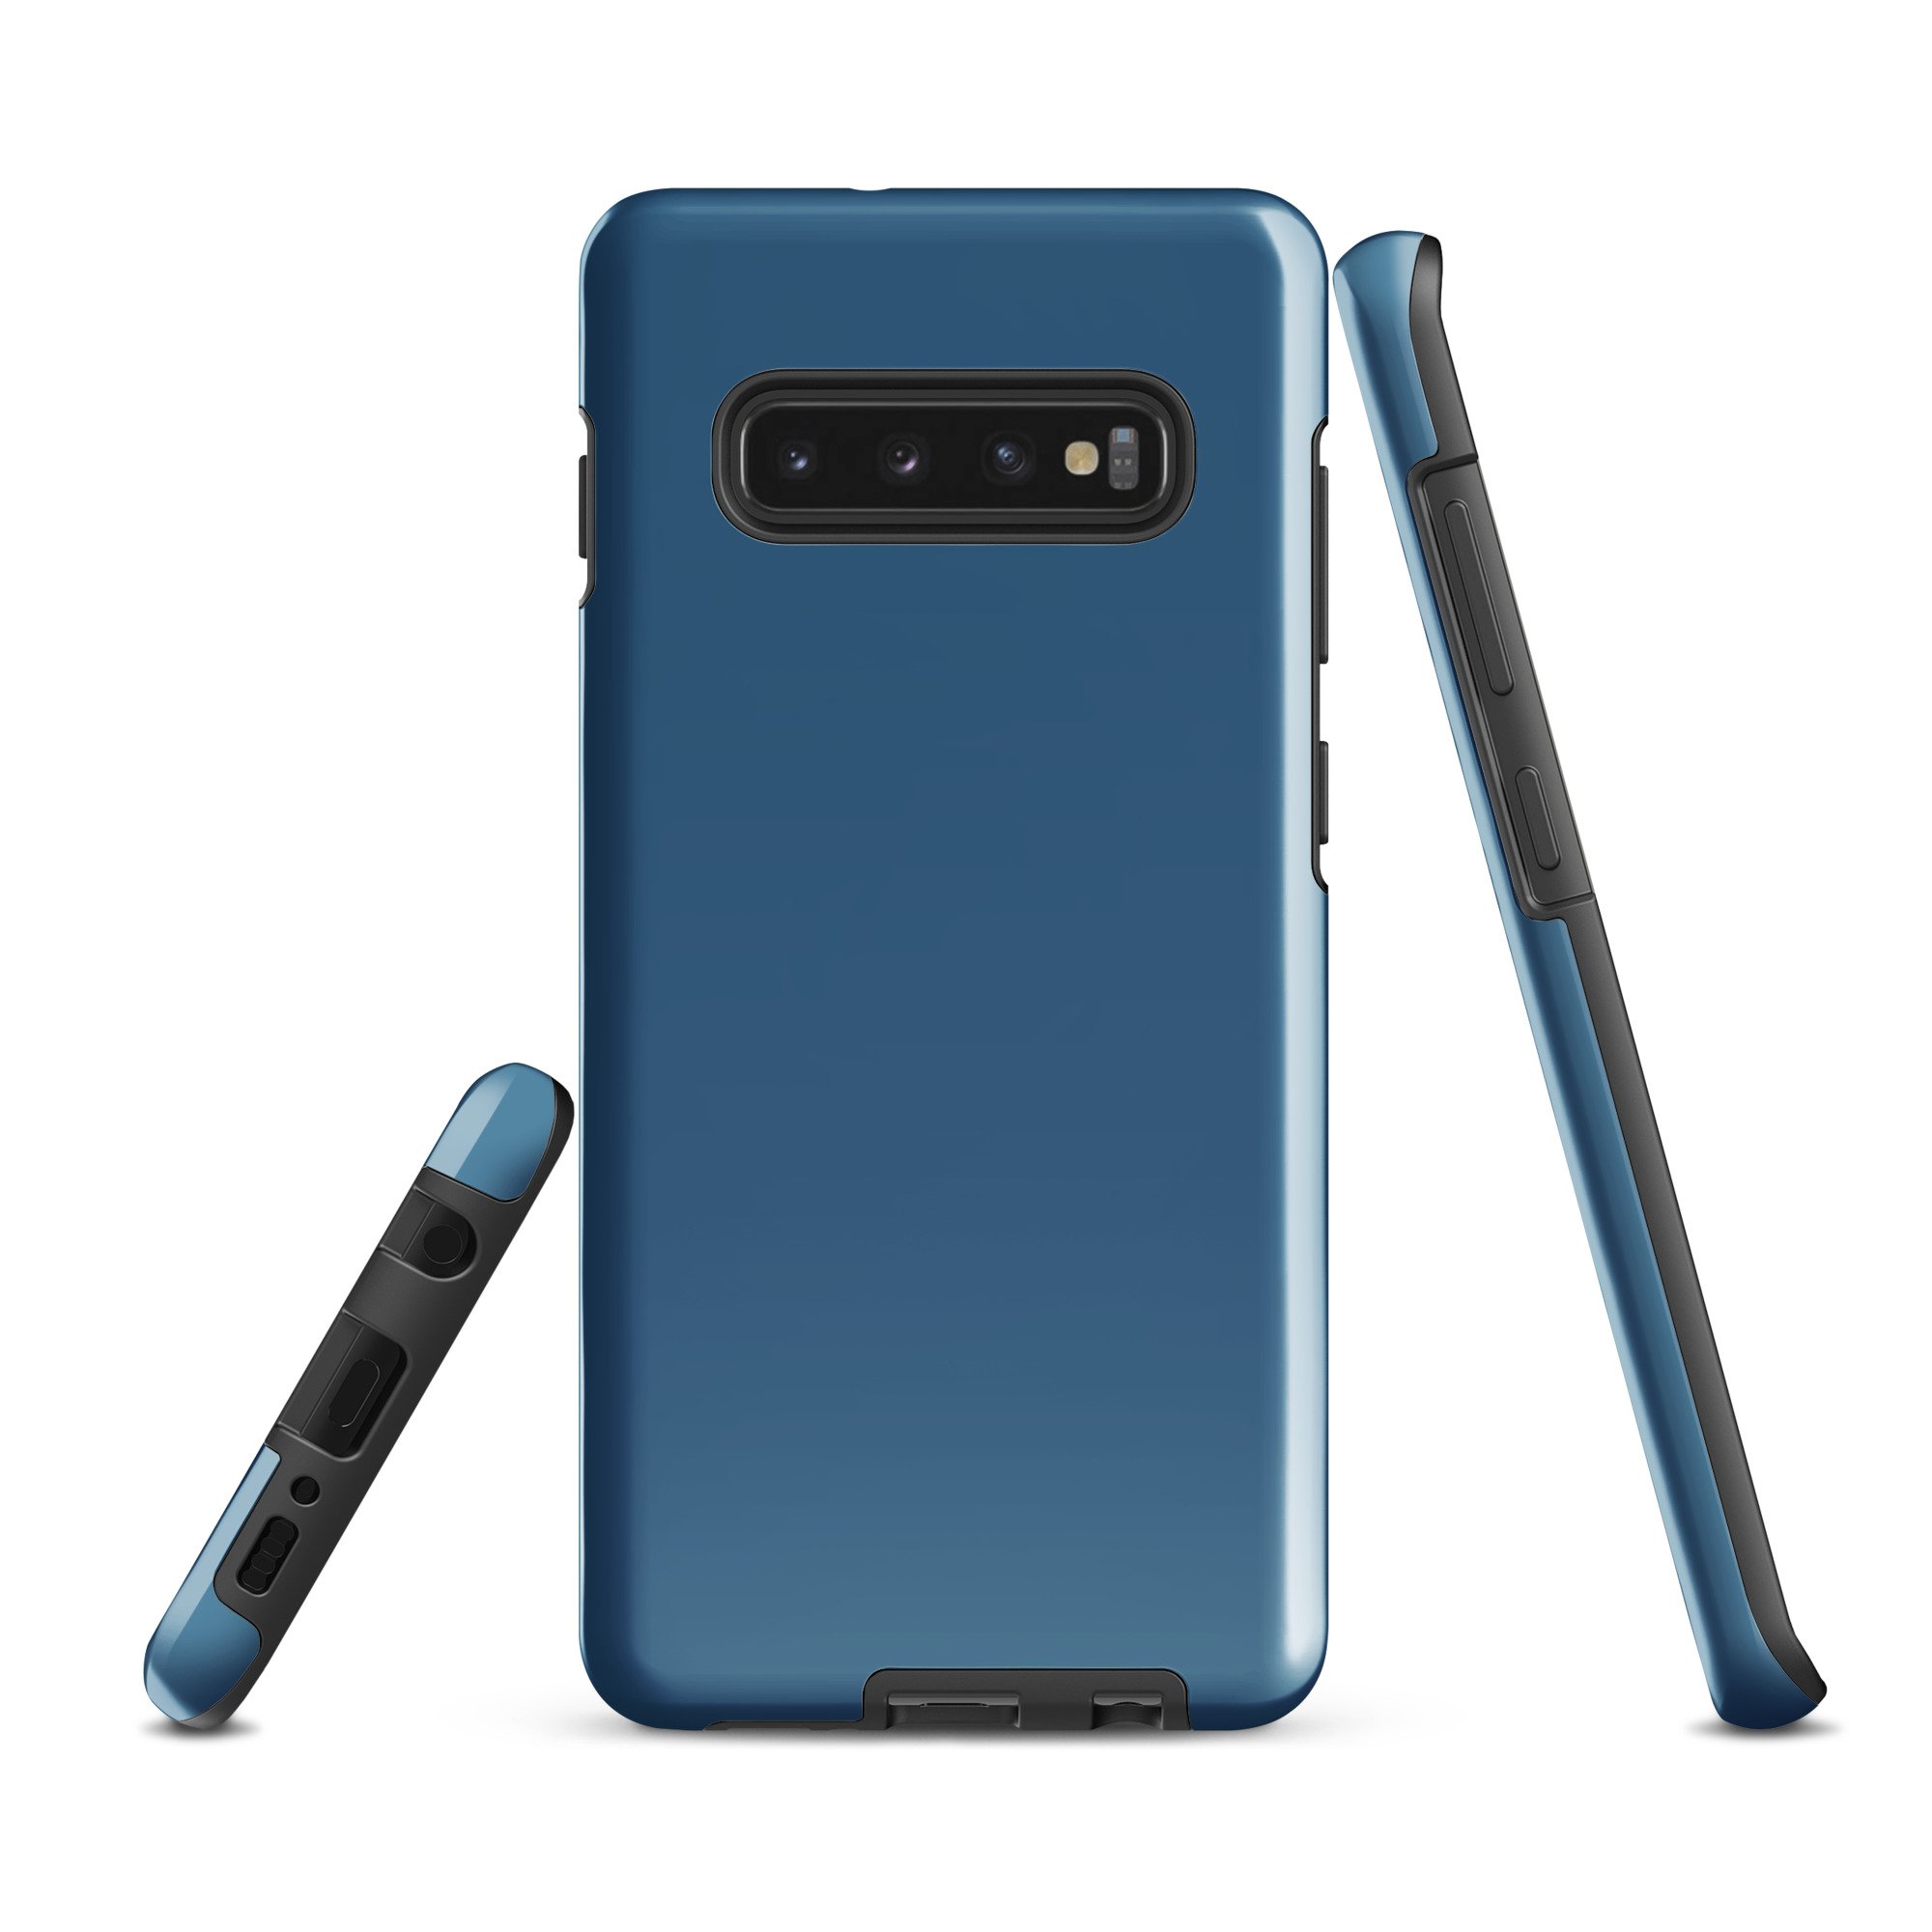 tough-case-for-samsung-glossy-samsung-galaxy-s10-plus-front-652a9720e4ee8.jpg